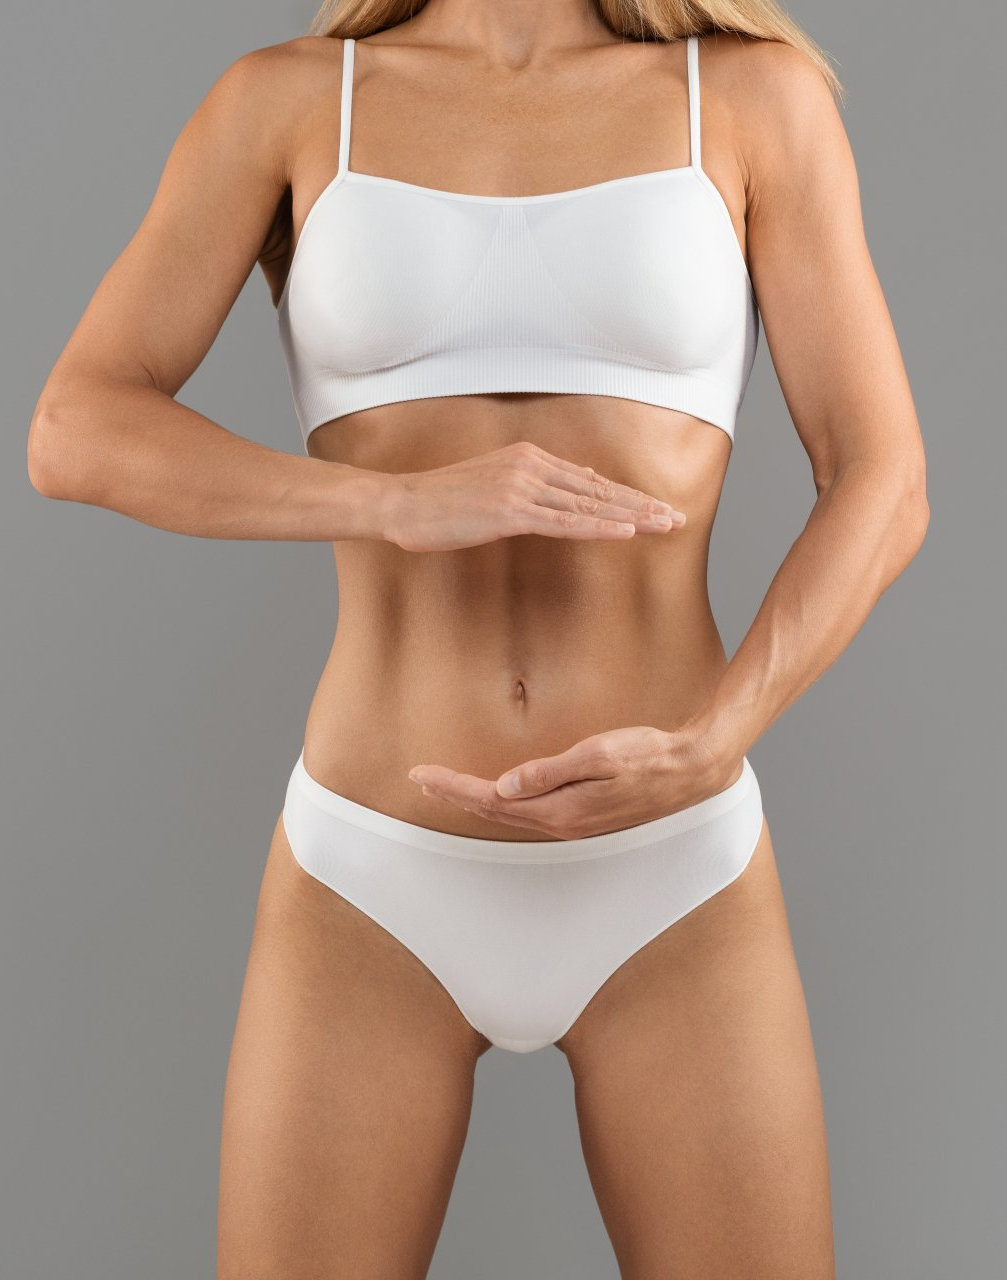 fit female in underwear holding invisible object